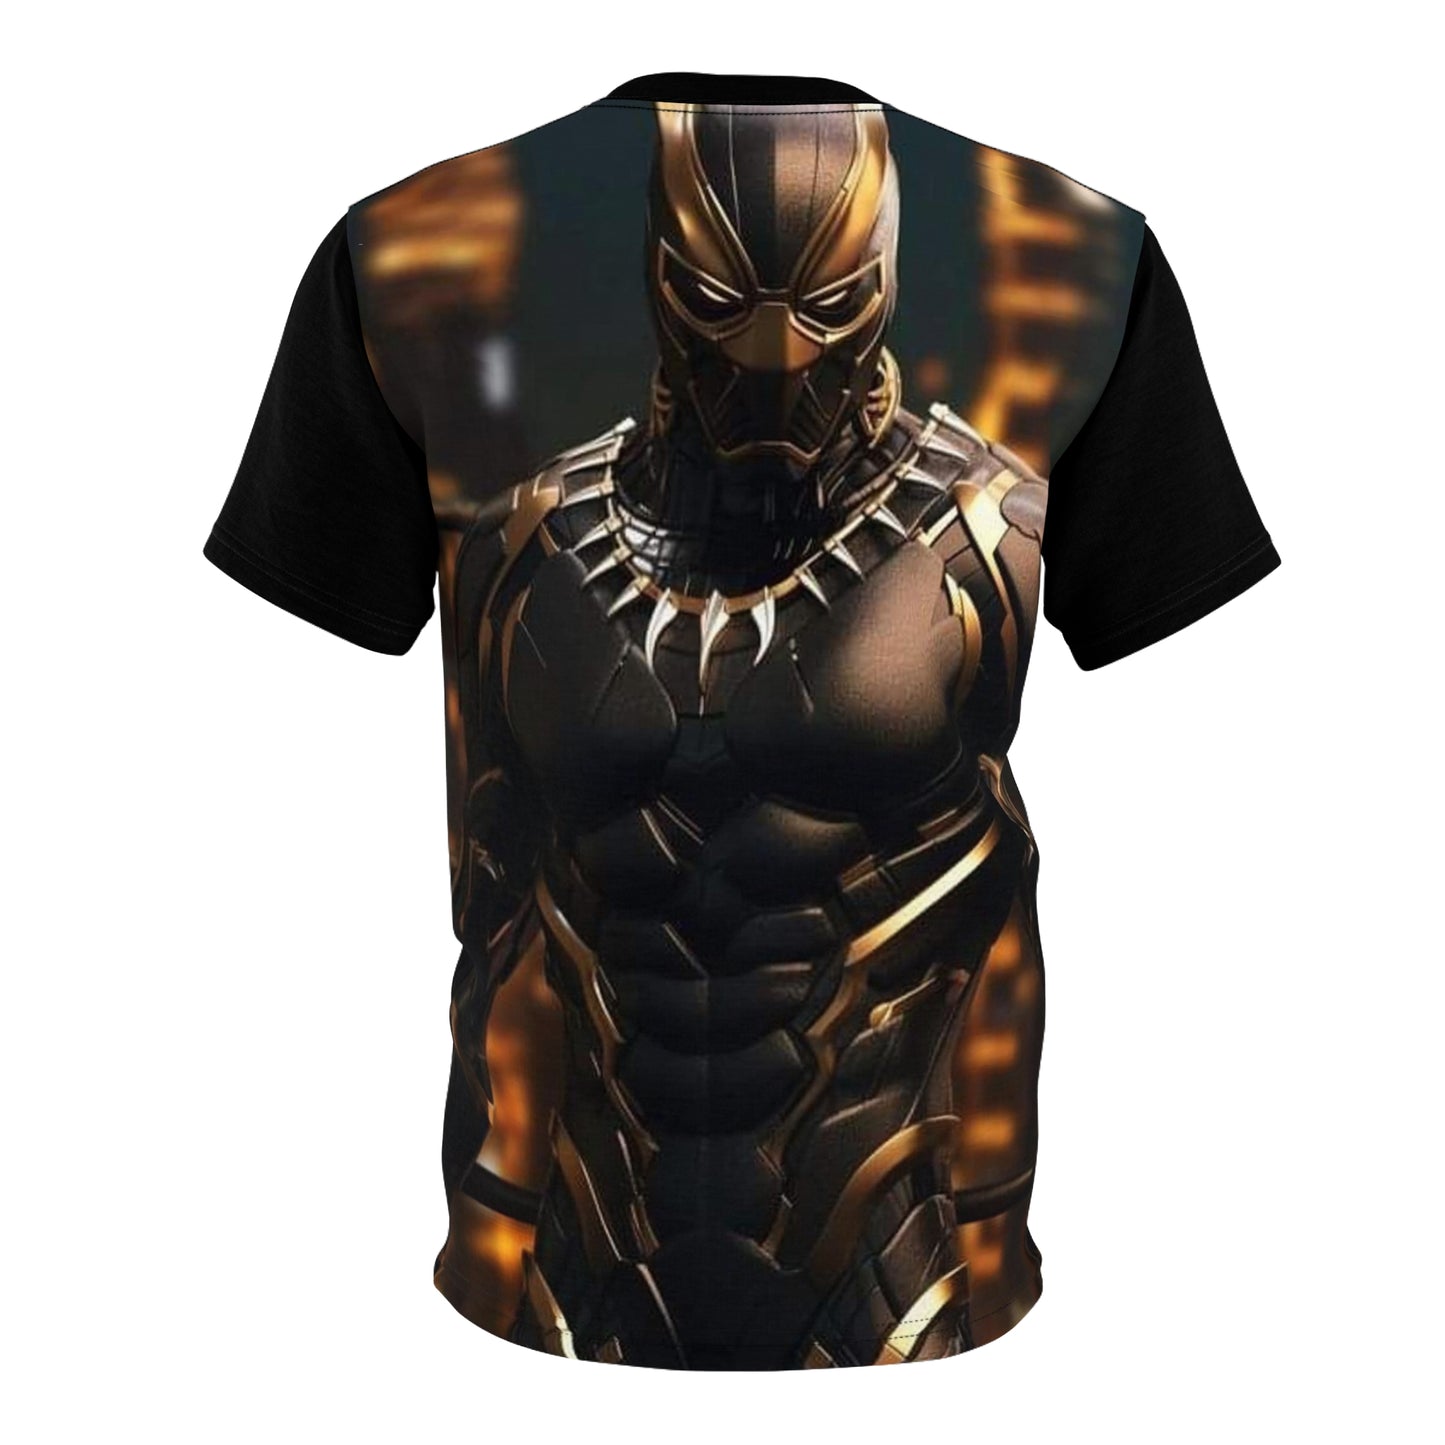 The Black Panther - Unisex Tee